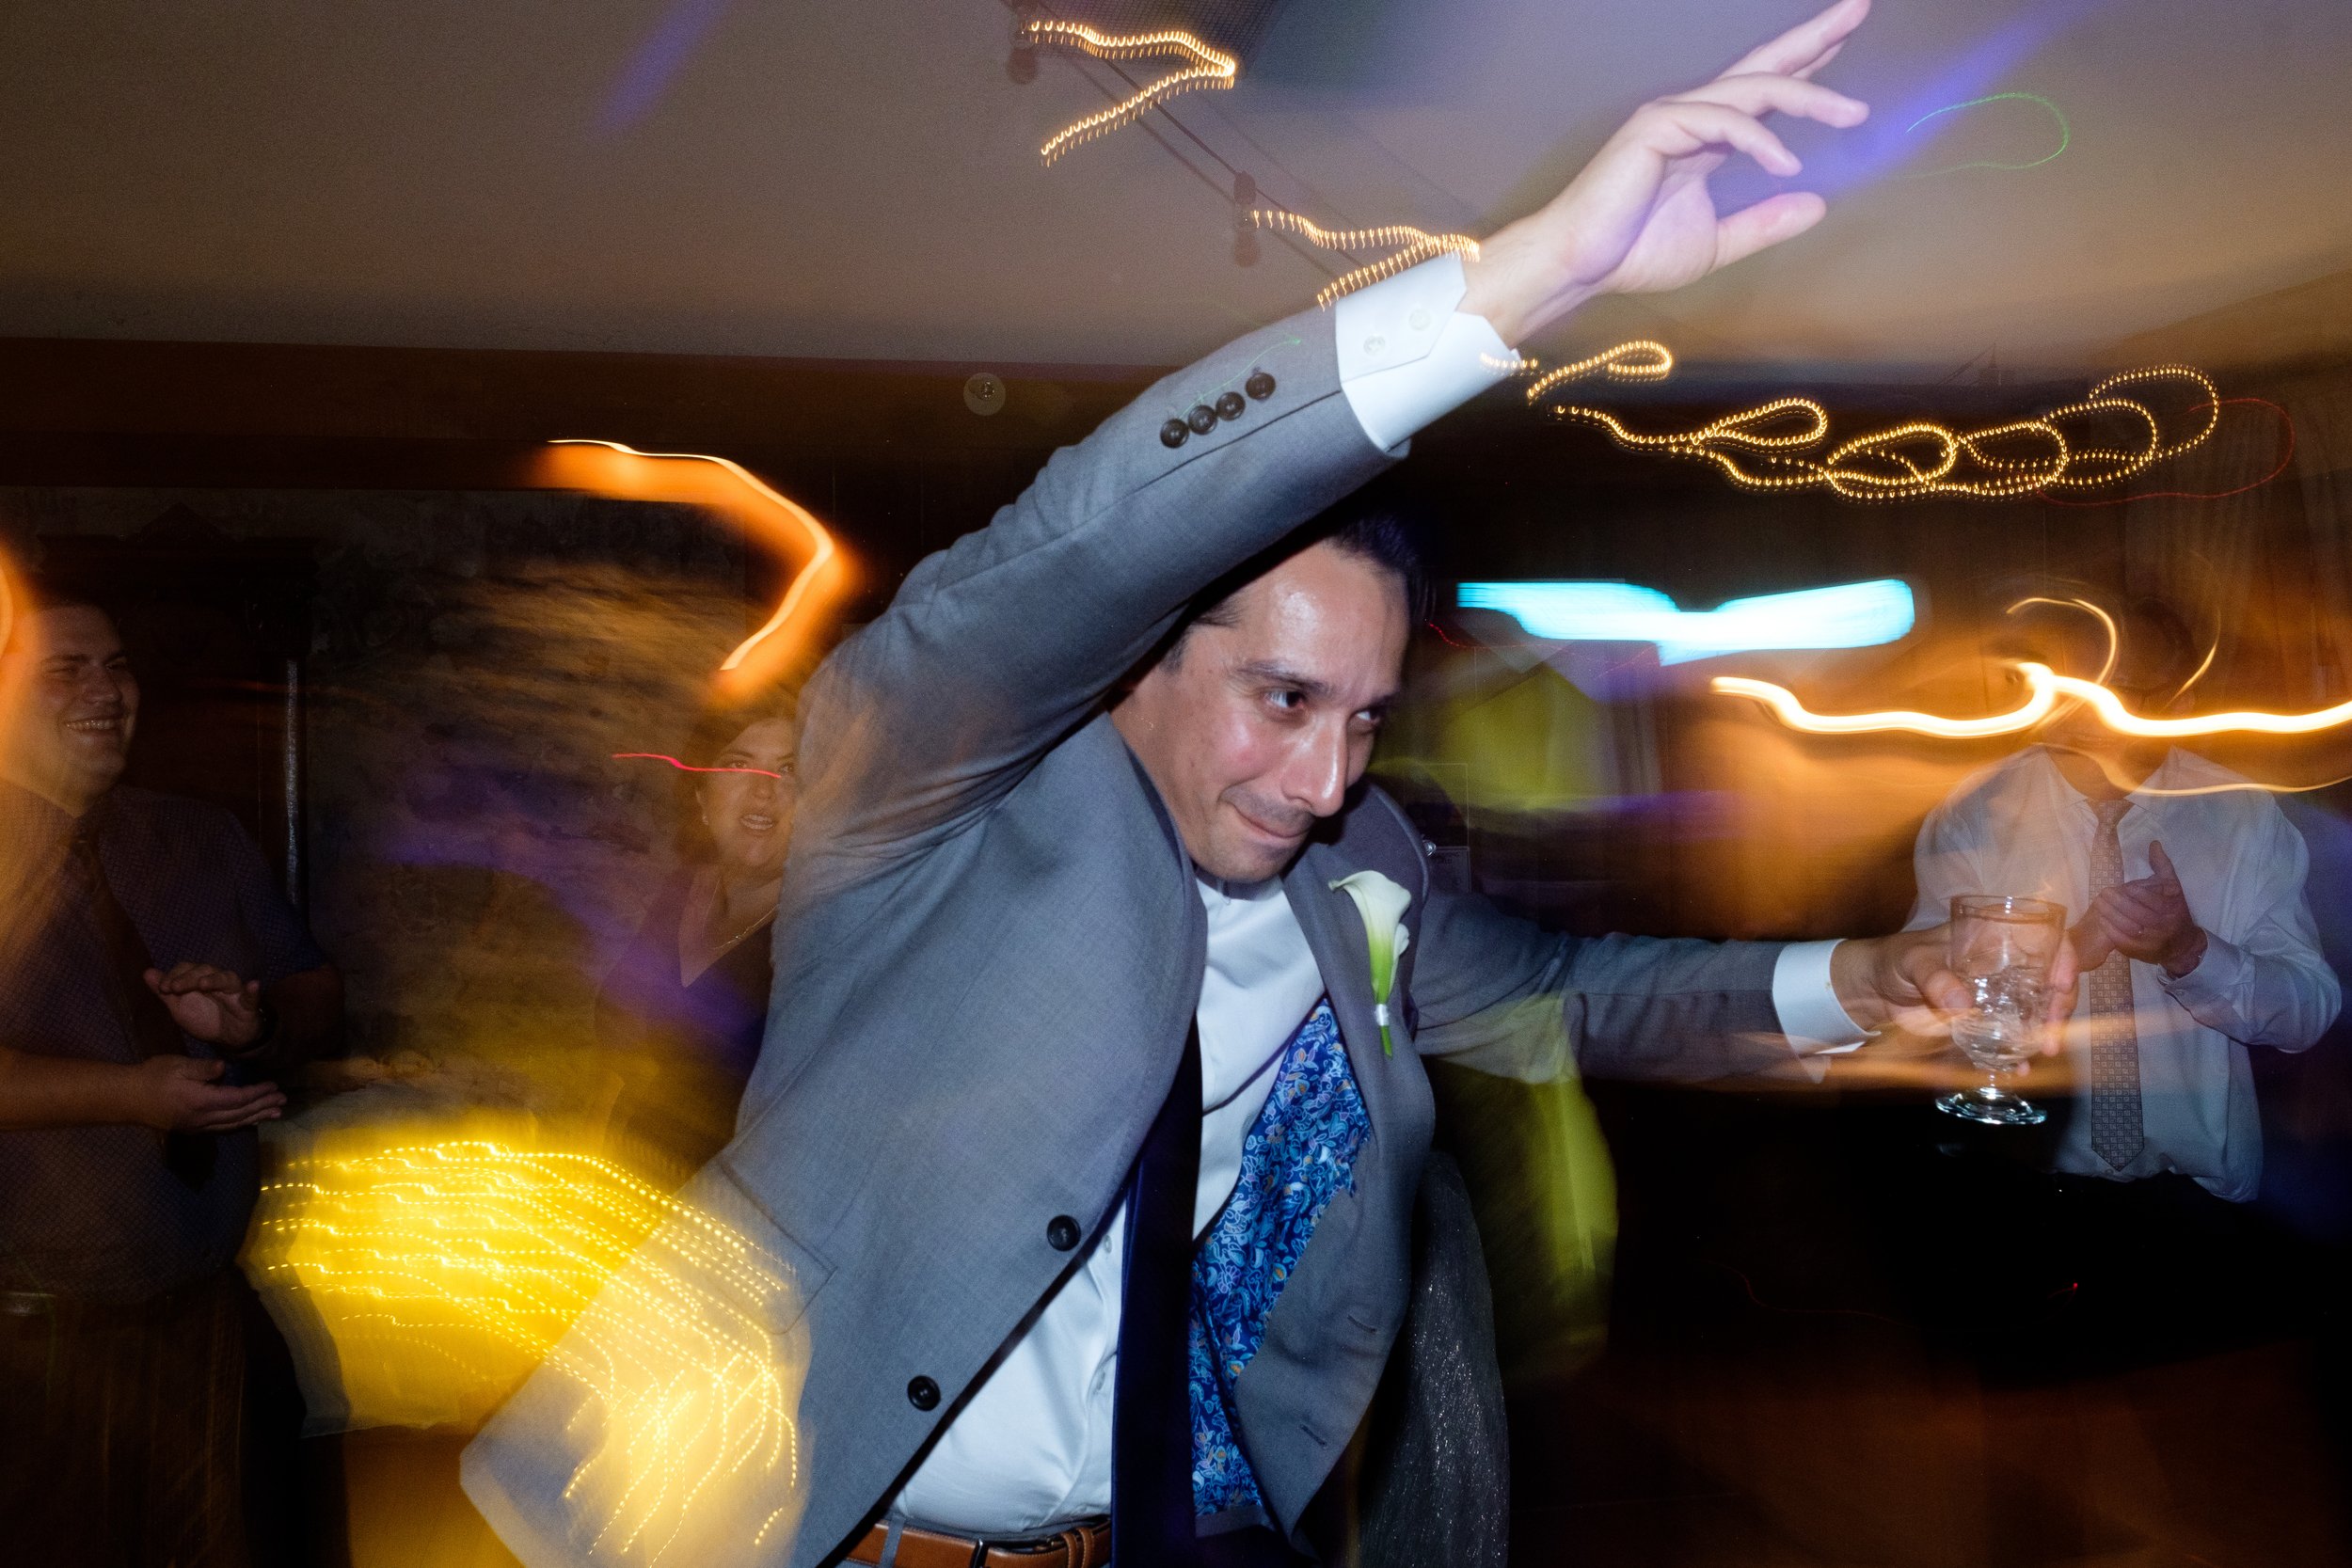  A candid colour wedding photograph of the groom on the dance floor during the reception at  Cassandra and Antony’s wedding at the Hessenland Inn by Toronto wedding photographer Scott Williams. 